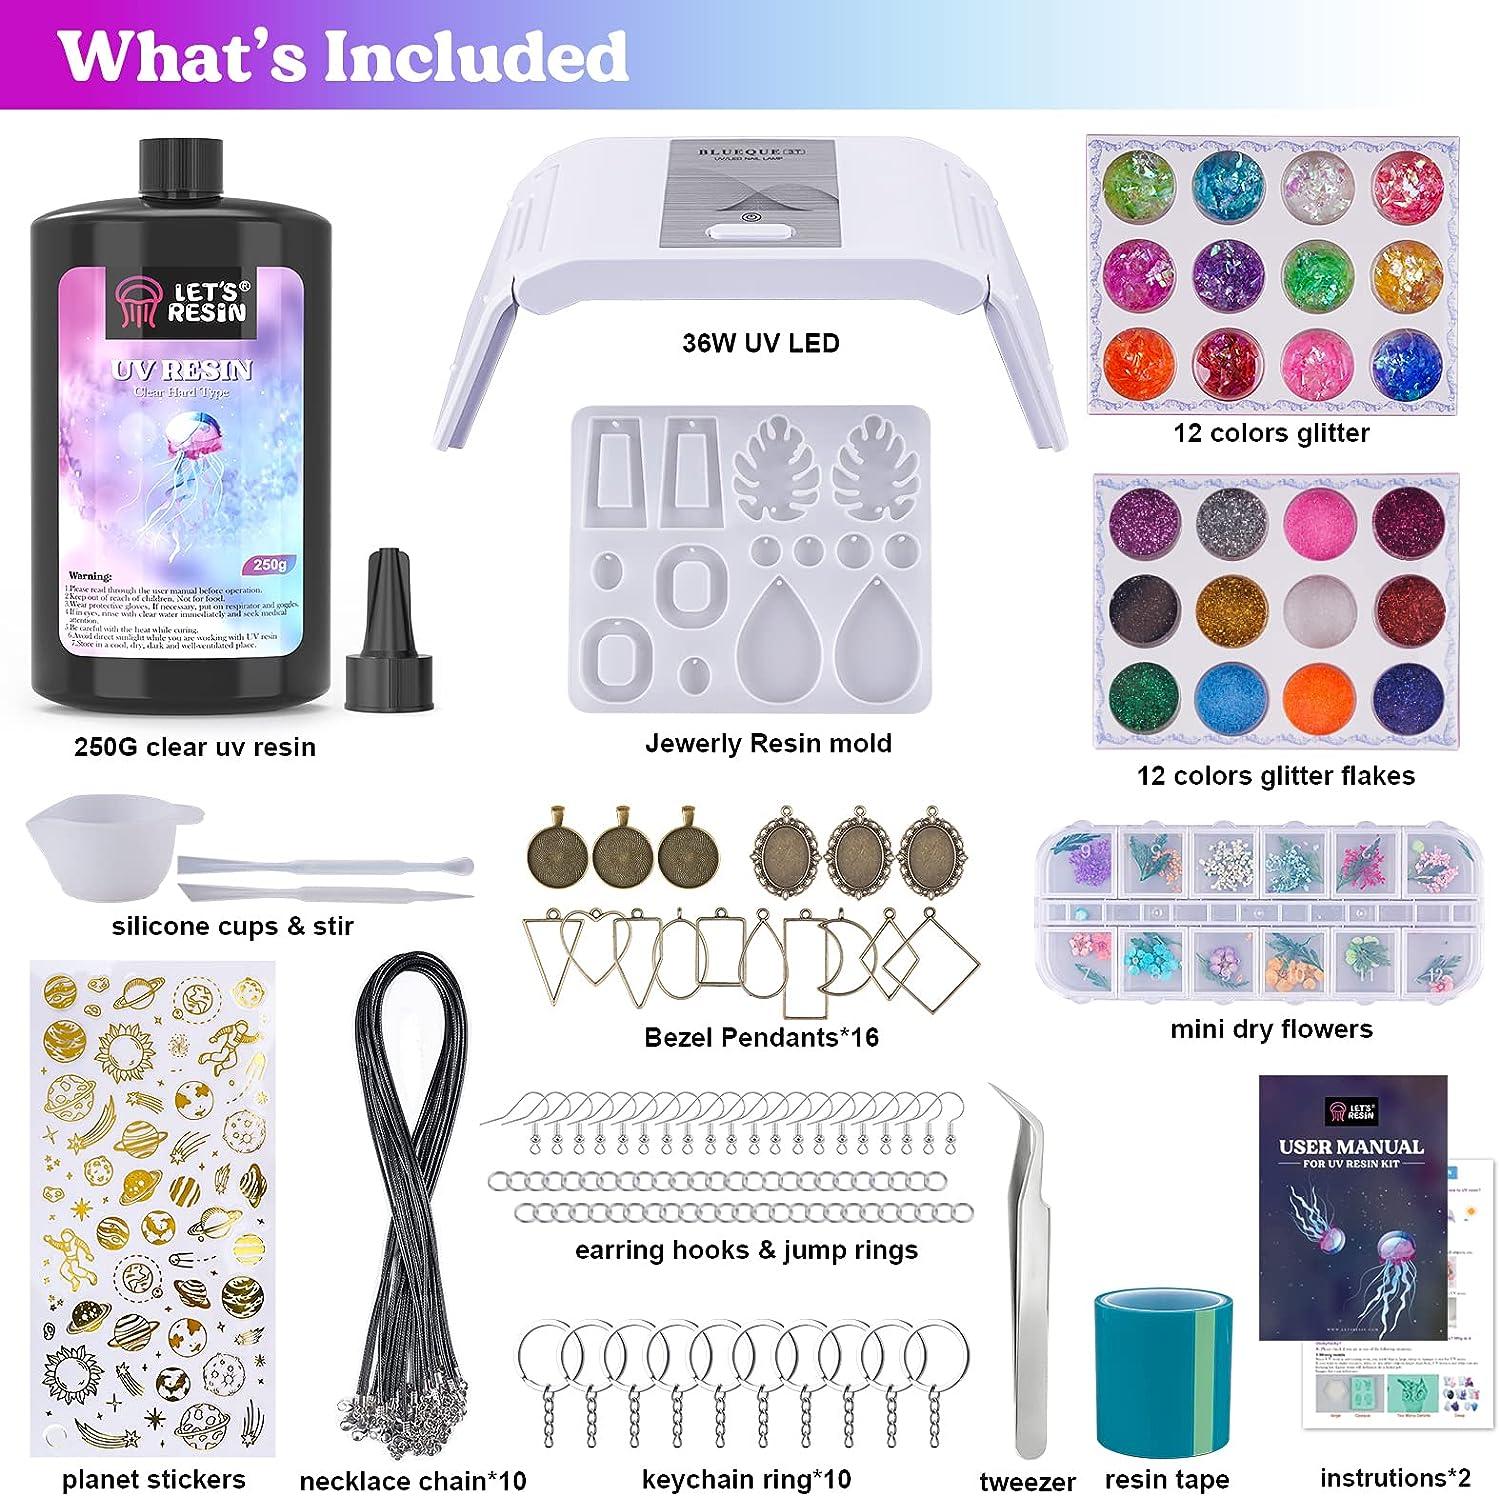 Let's Resin UV Resin Kit with Copper & Flat Aluminum Jewelry Wires